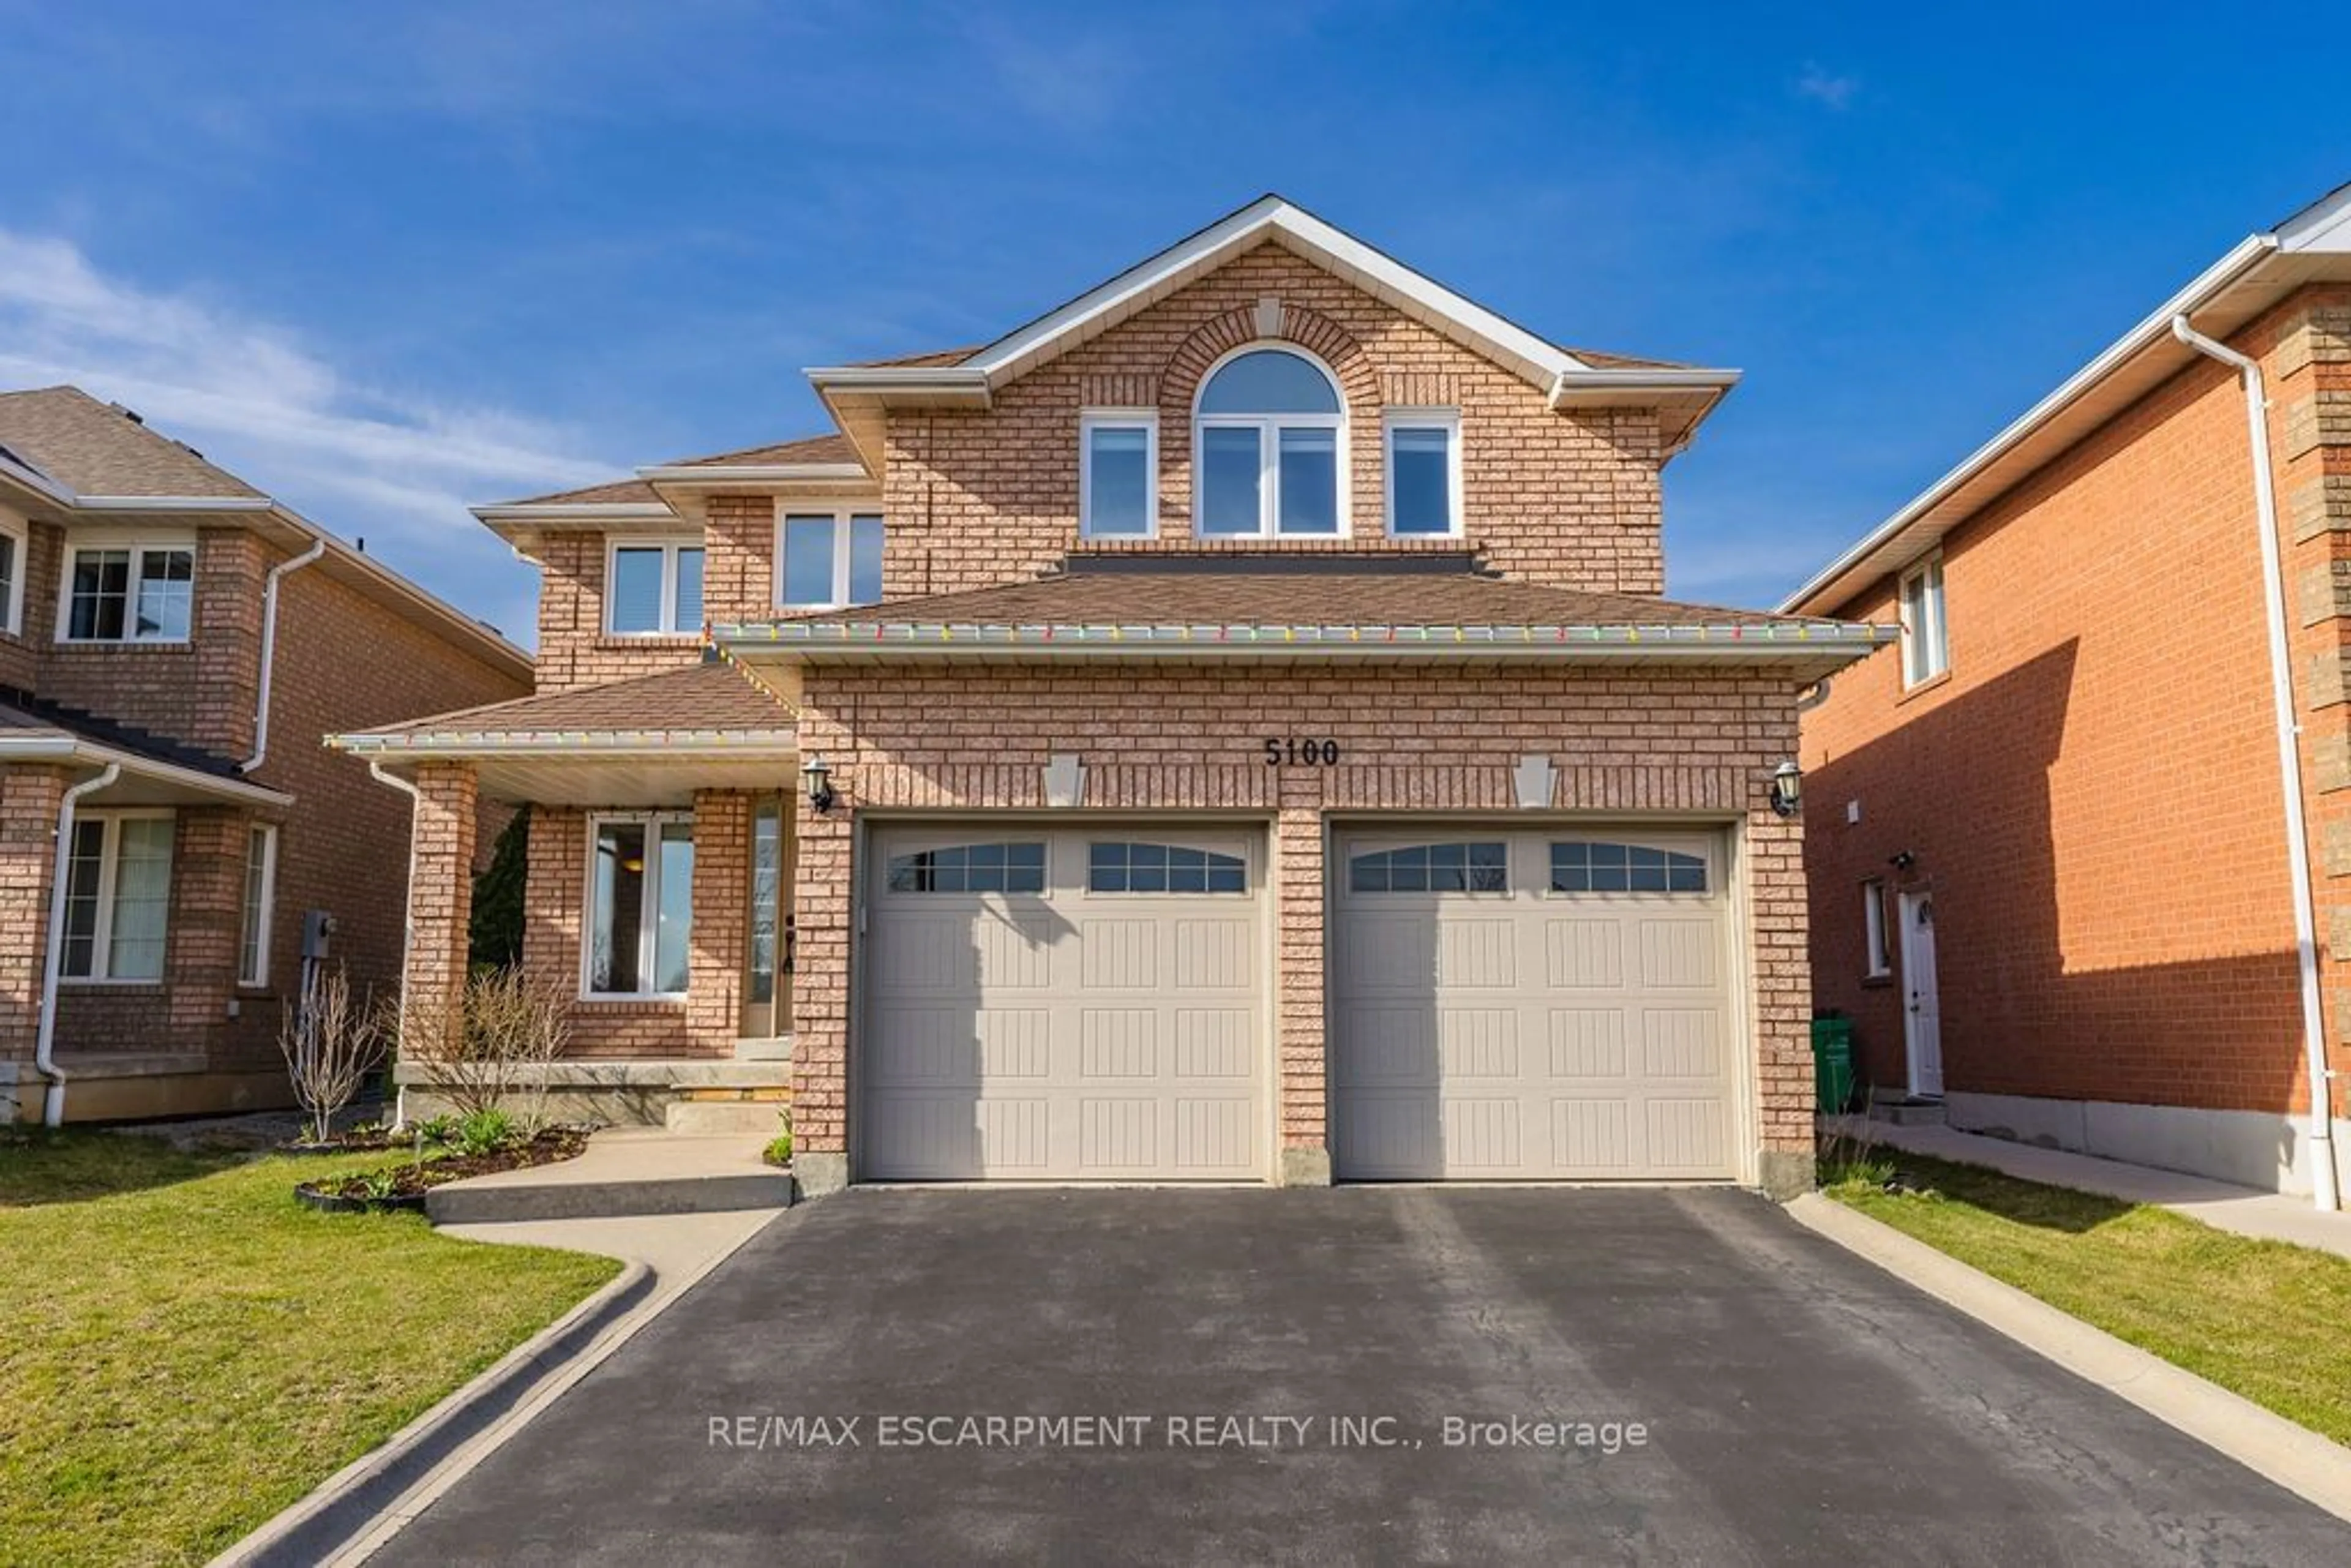 Home with brick exterior material for 5100 Fallingbrook Dr, Mississauga Ontario L5V 1S7